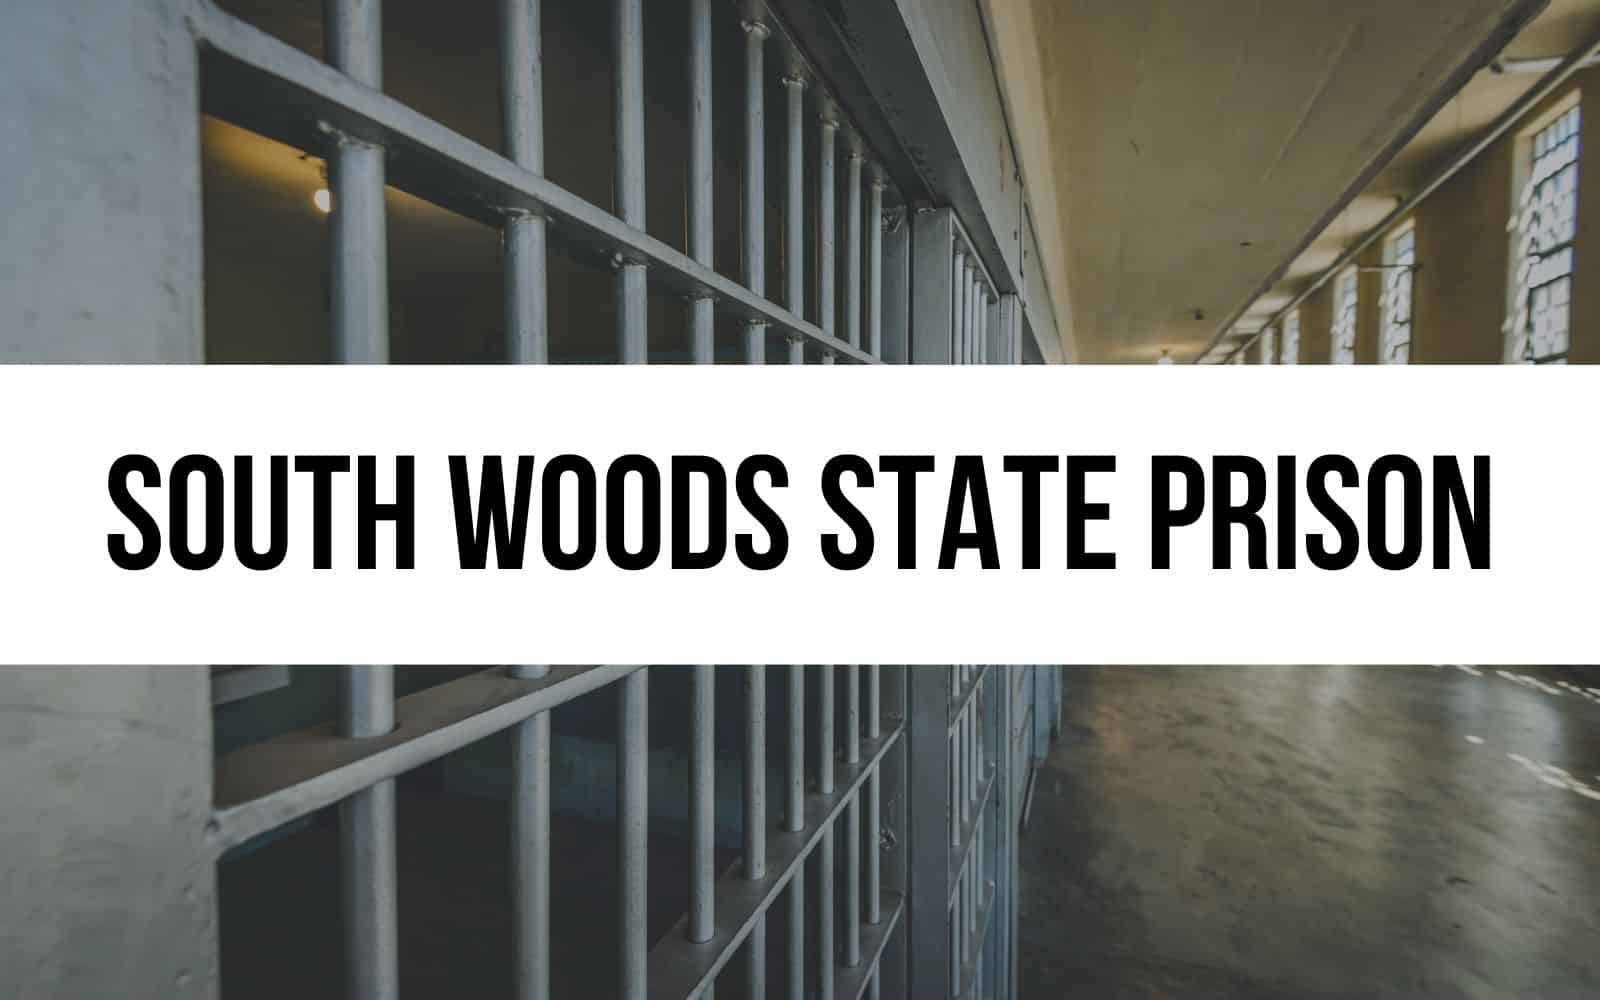 South Woods State Prison: History, Programs, and Services